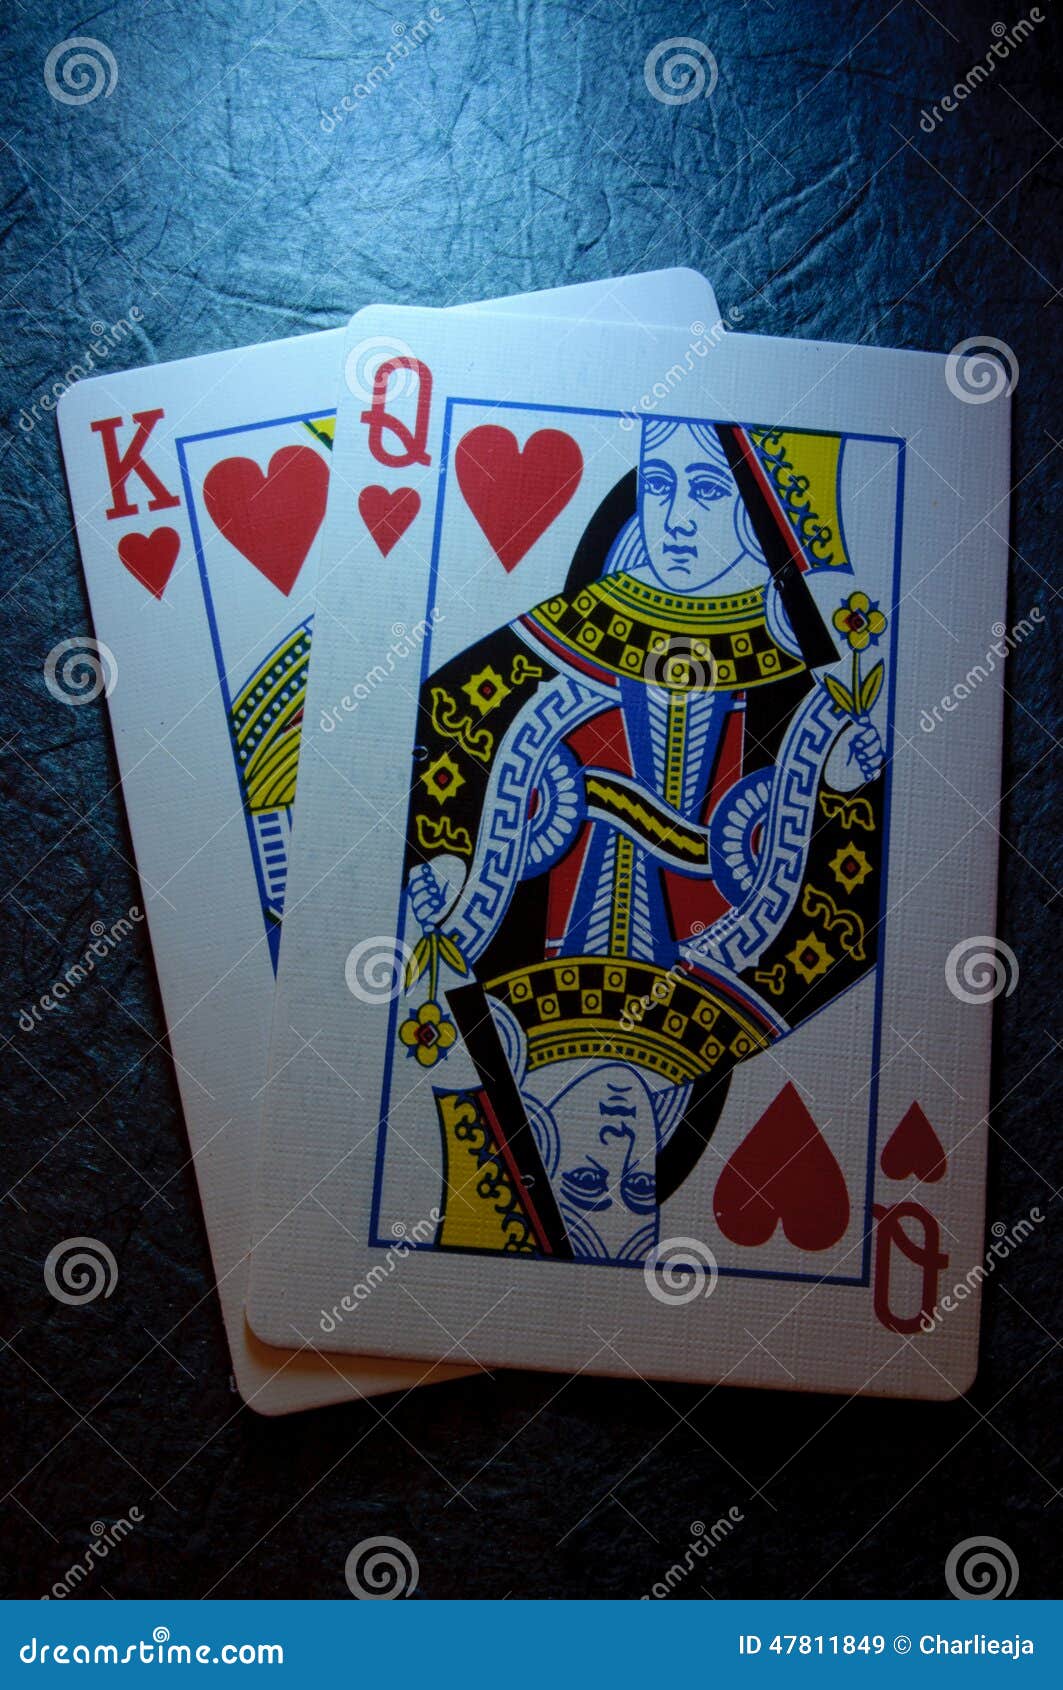 King And Queen Of Hearts Stock Image Image Of Cards 47811849